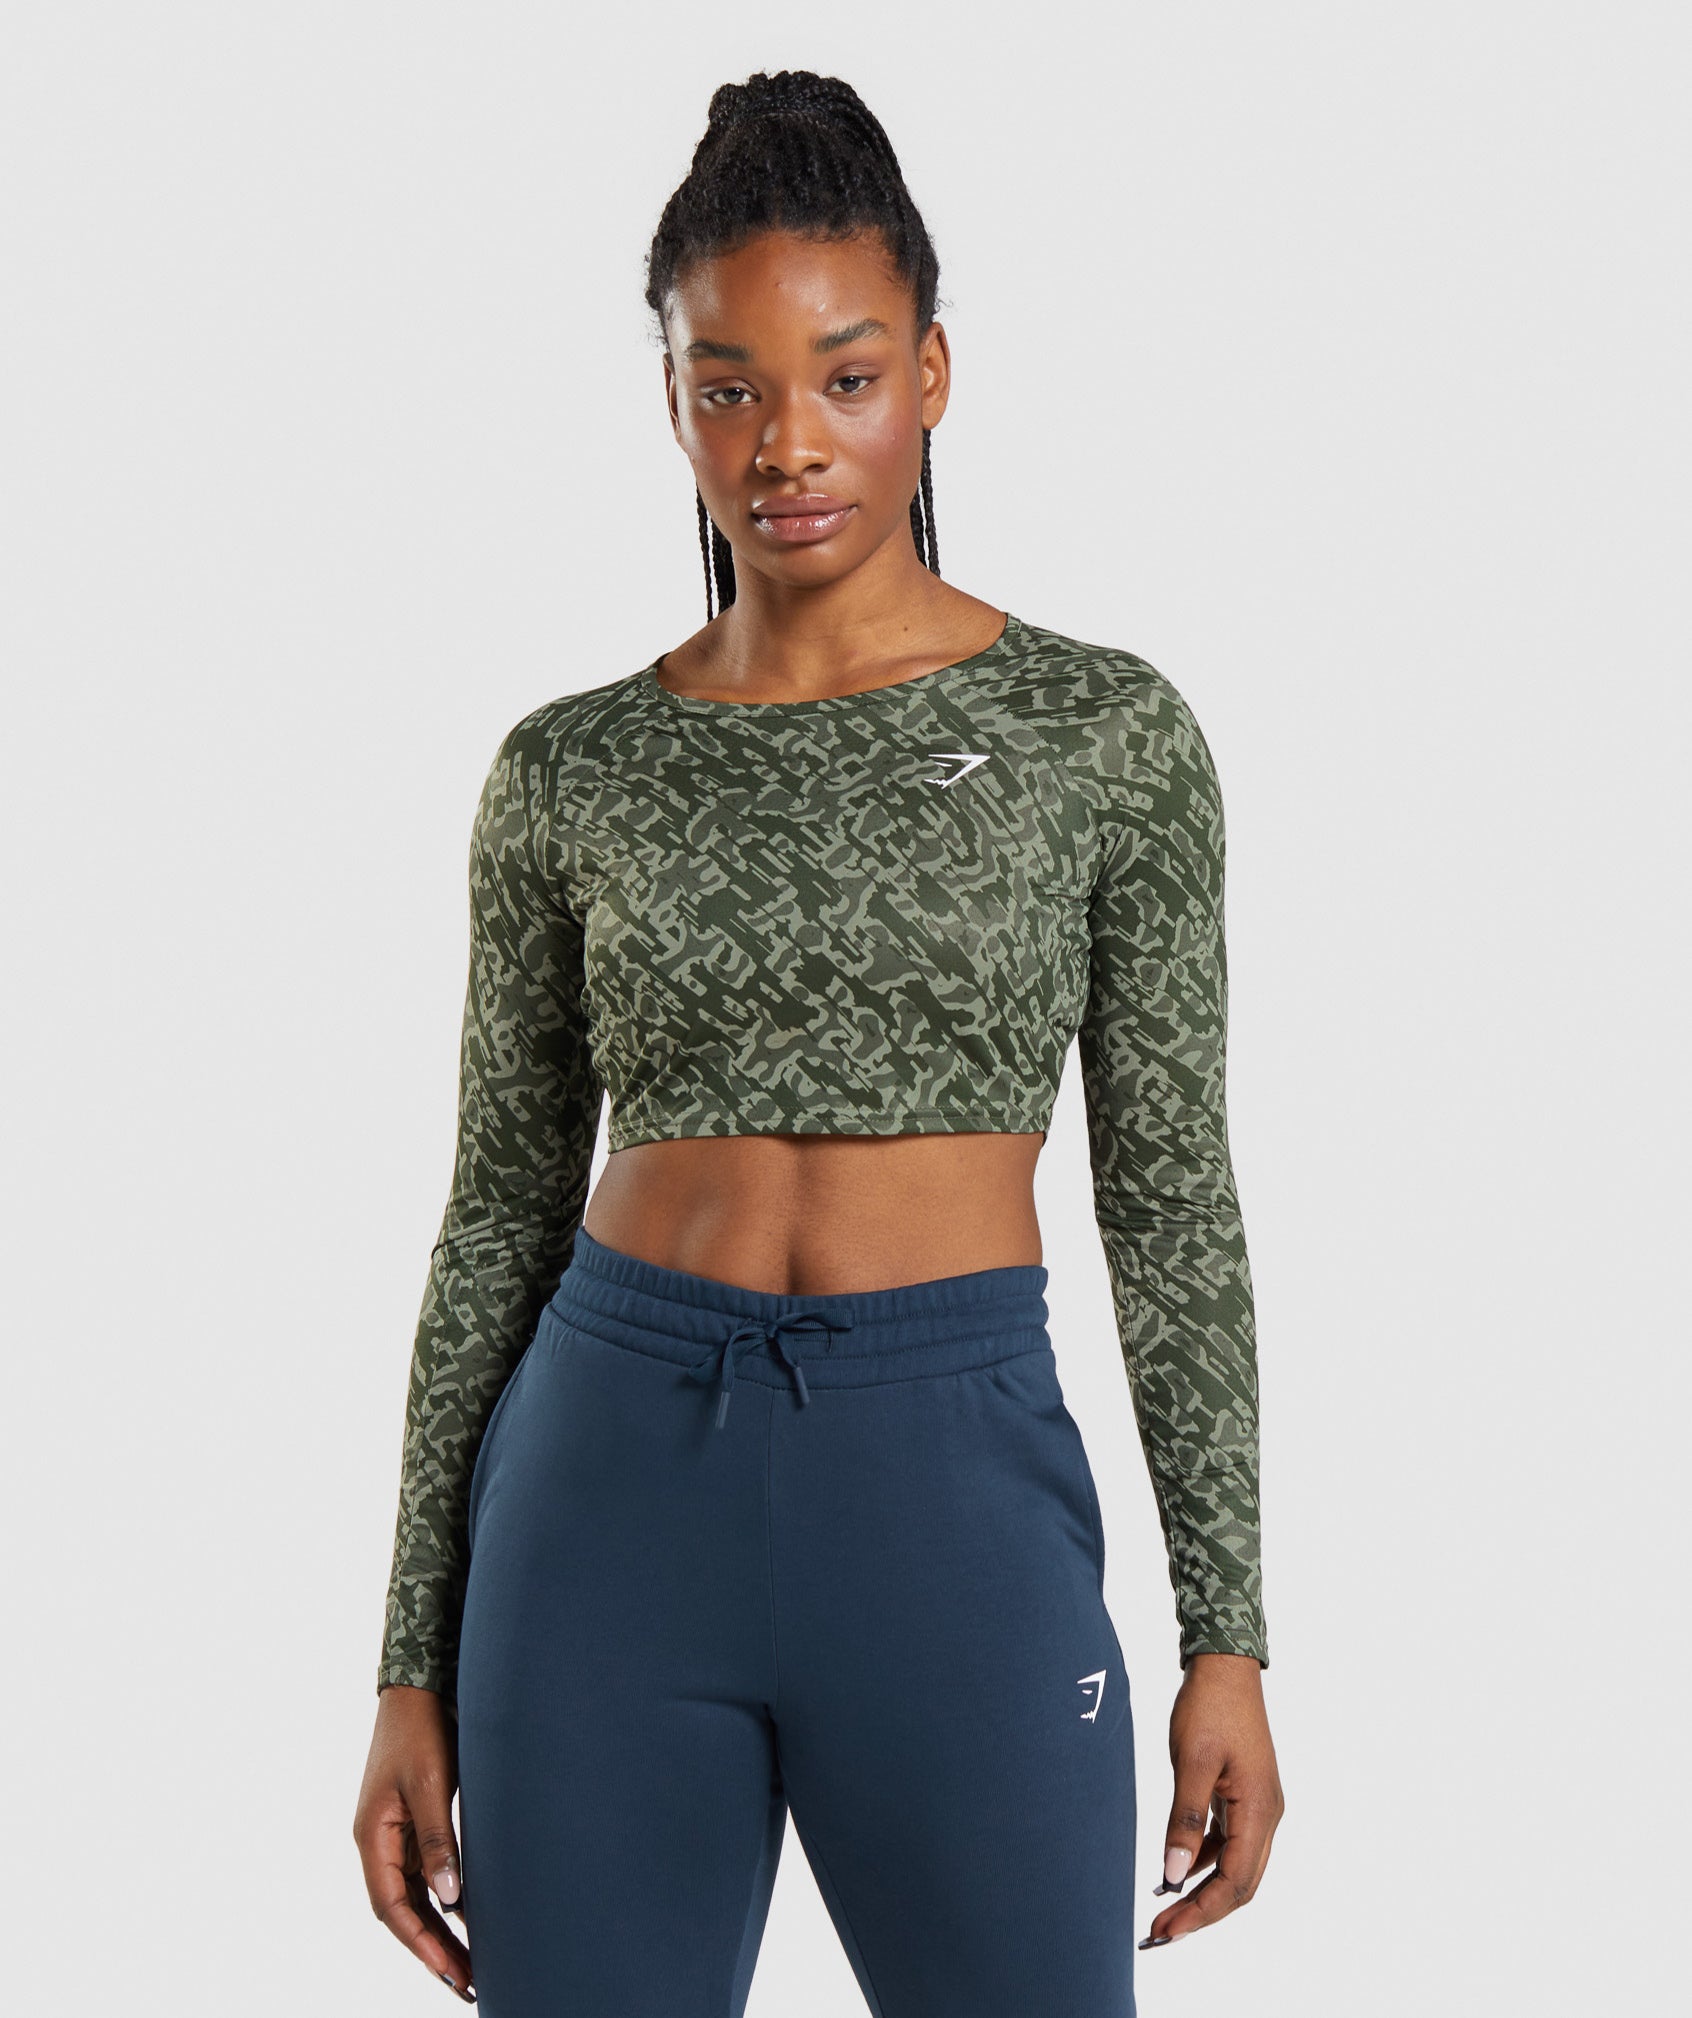 Green Ribbed Workout Set - Long Sleeve Crop Top and Leggings